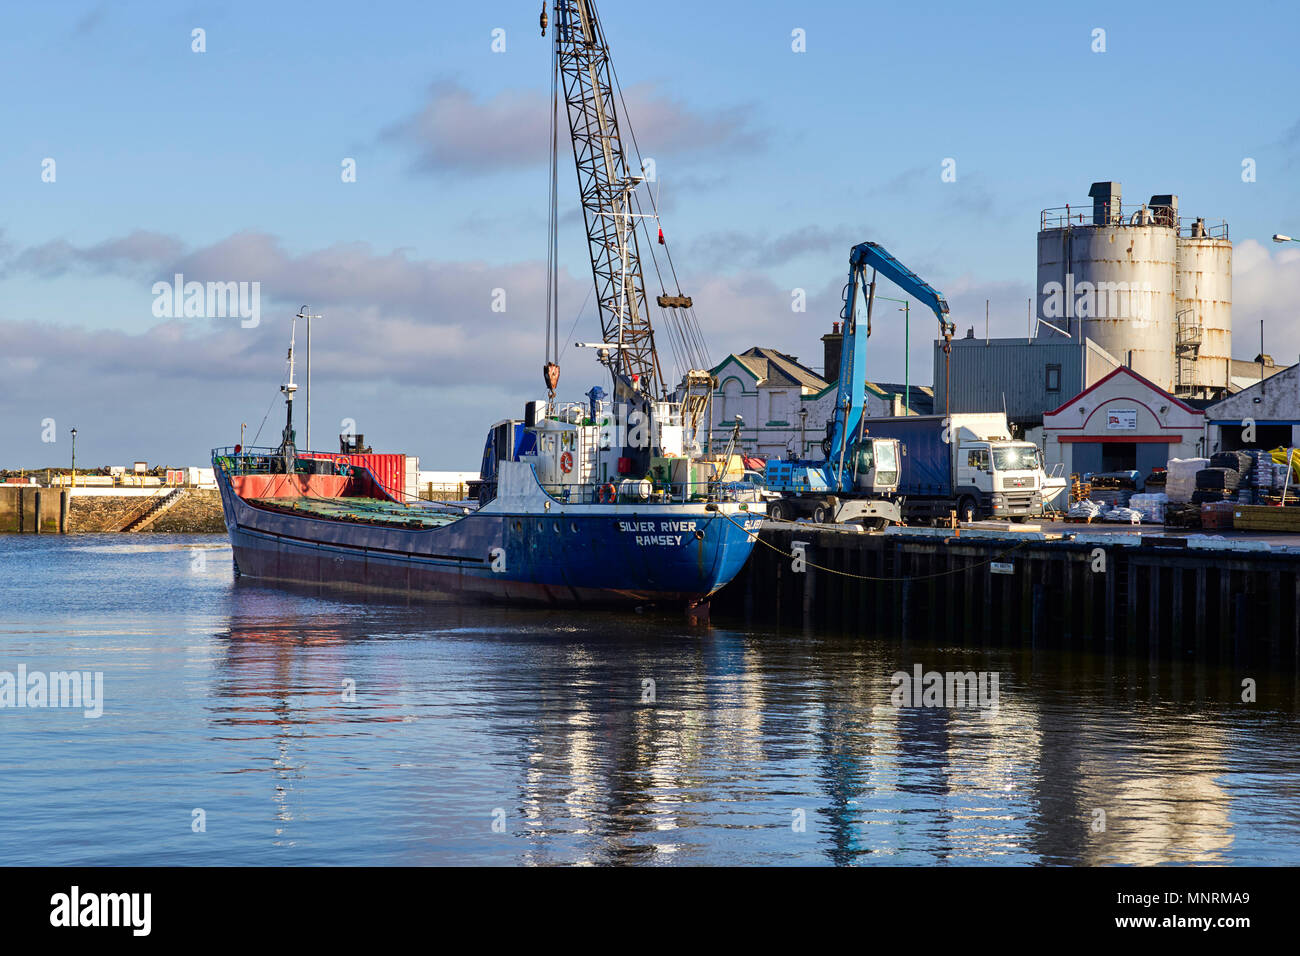 Coaster boat Silver River docked at Ramsey commercial docks in the Isle of Man Stock Photo